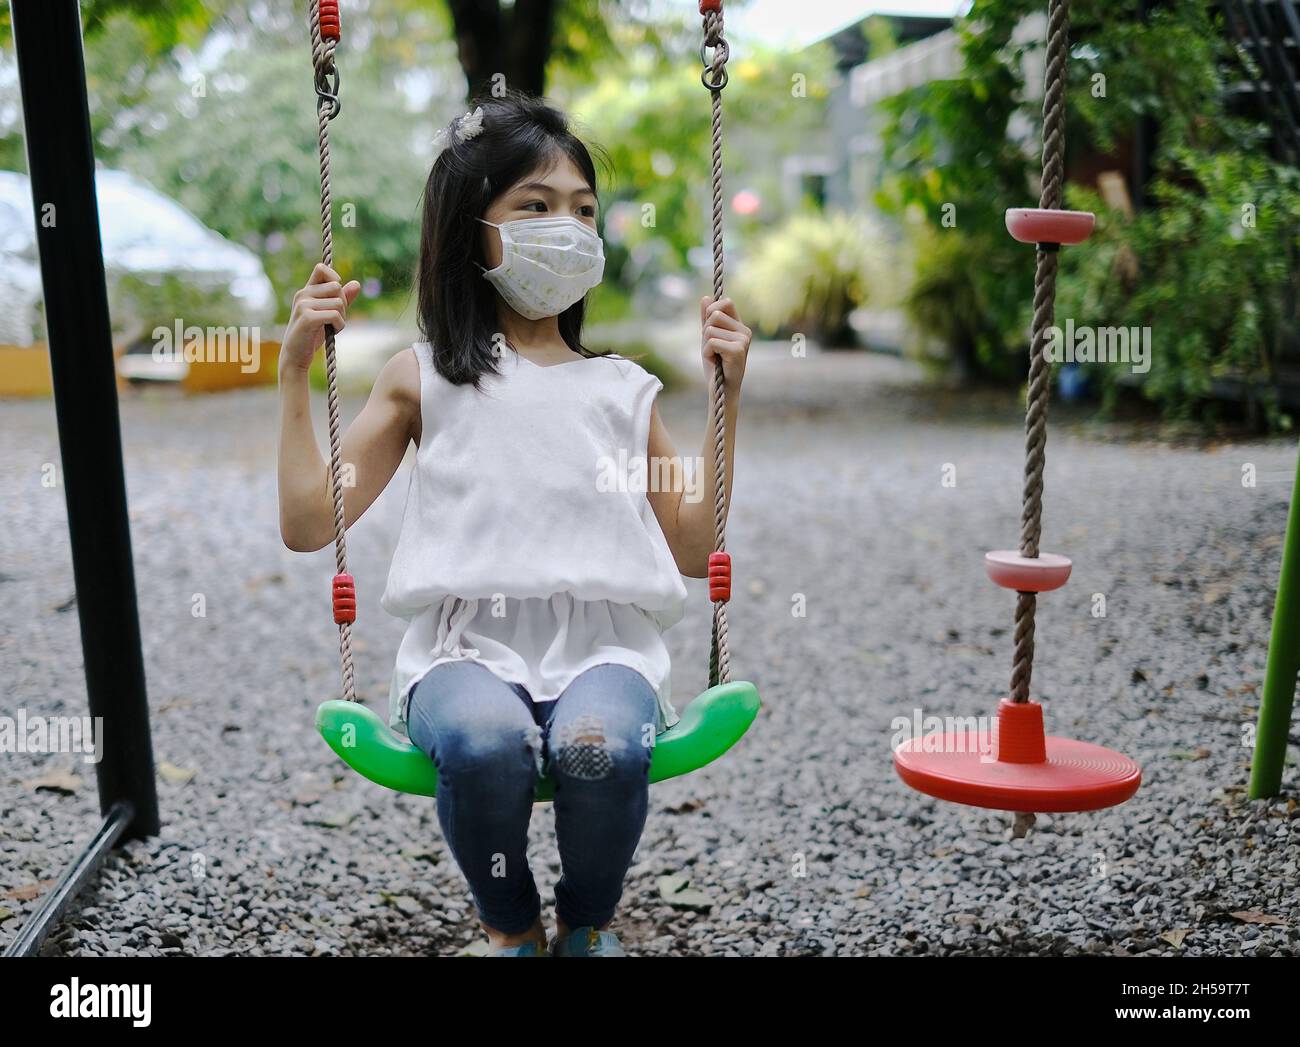 A cute young Asian girl with a white face mask is playing alone on a swing in a playground during the Covid-19 pandemic. Stock Photo